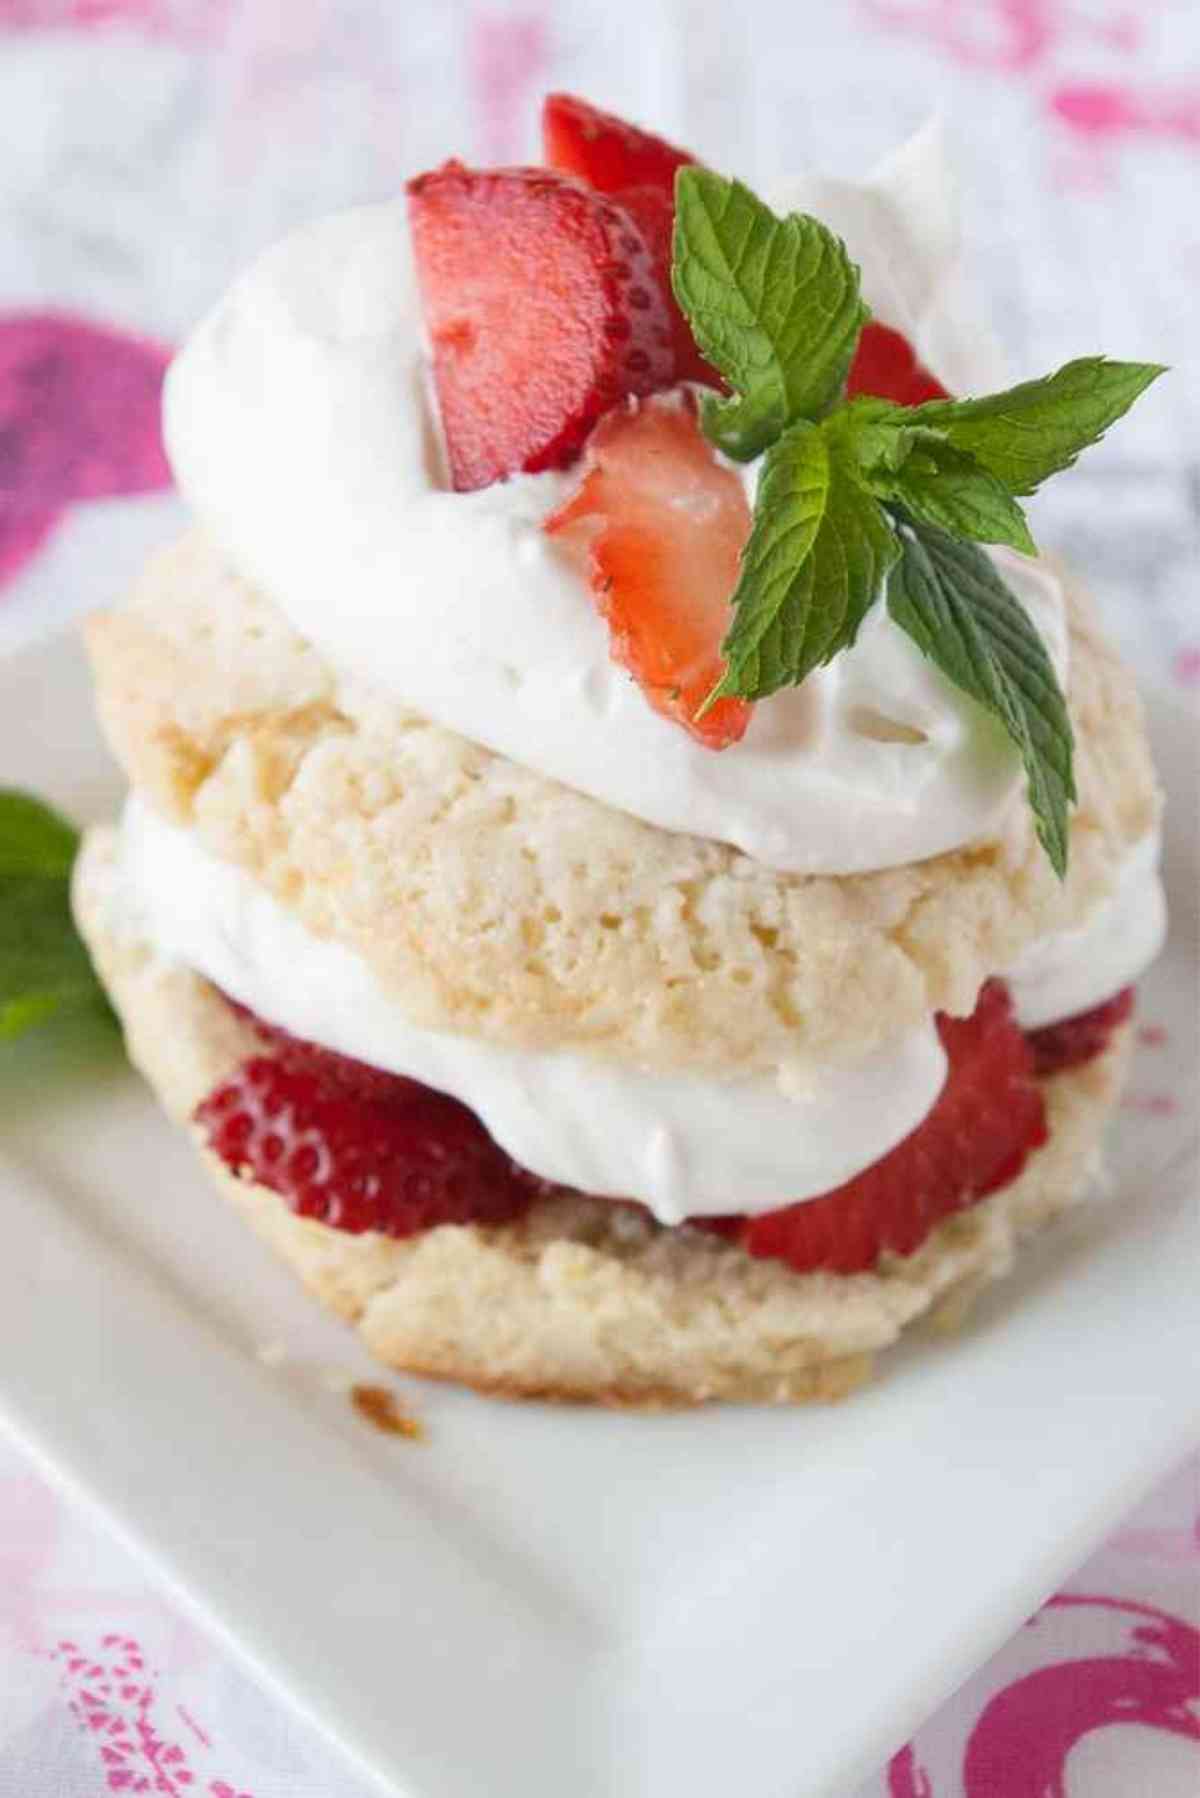 Strawberry shortcake garnished with mint and fresh strawberries.